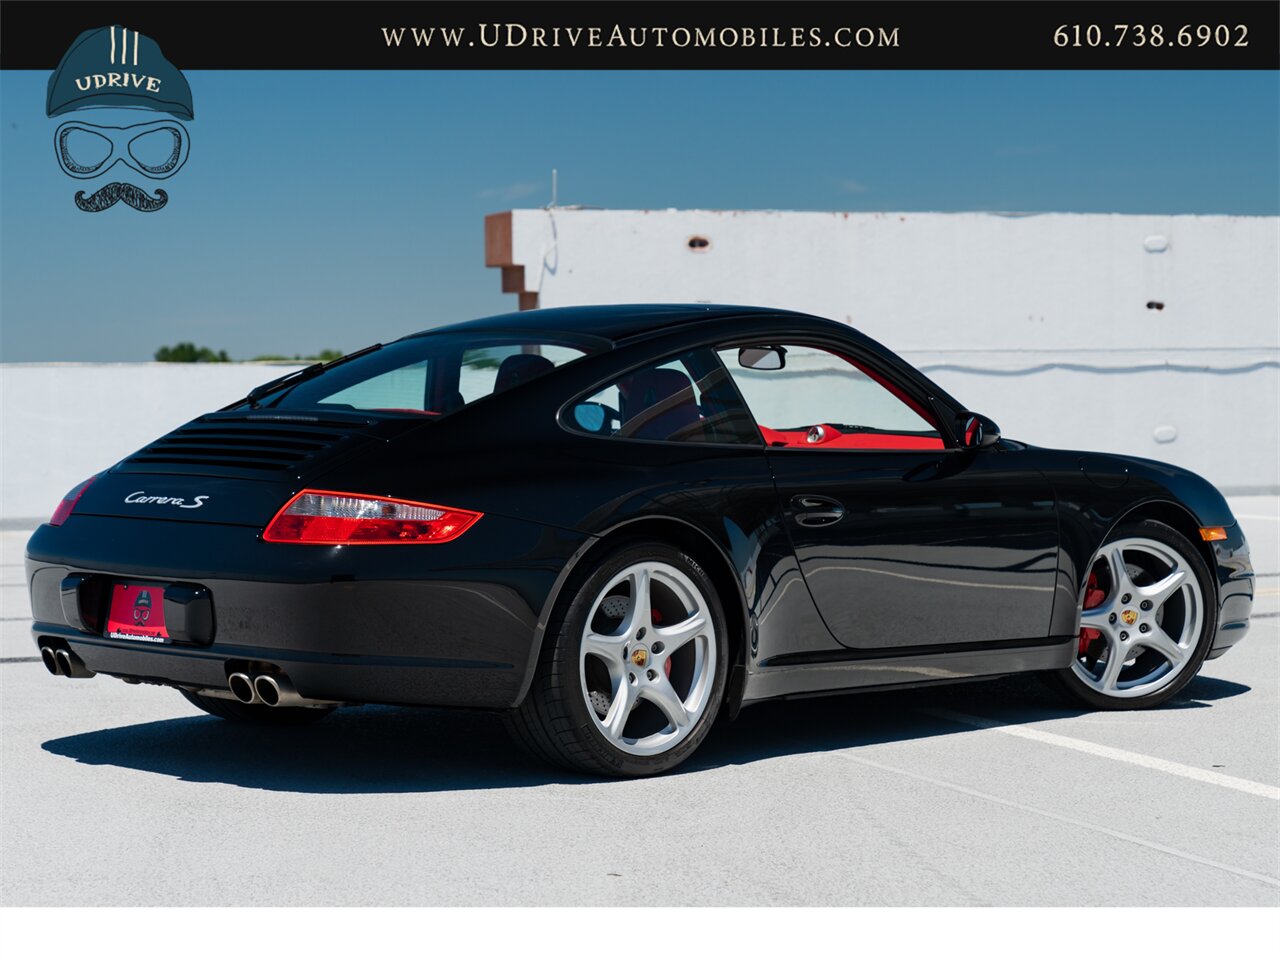 2005 Porsche 911 Carrera 911S 997 6 Speed 13k Miles Chrono  Leather to Sample Boxster Red/Blk Service History - Photo 3 - West Chester, PA 19382